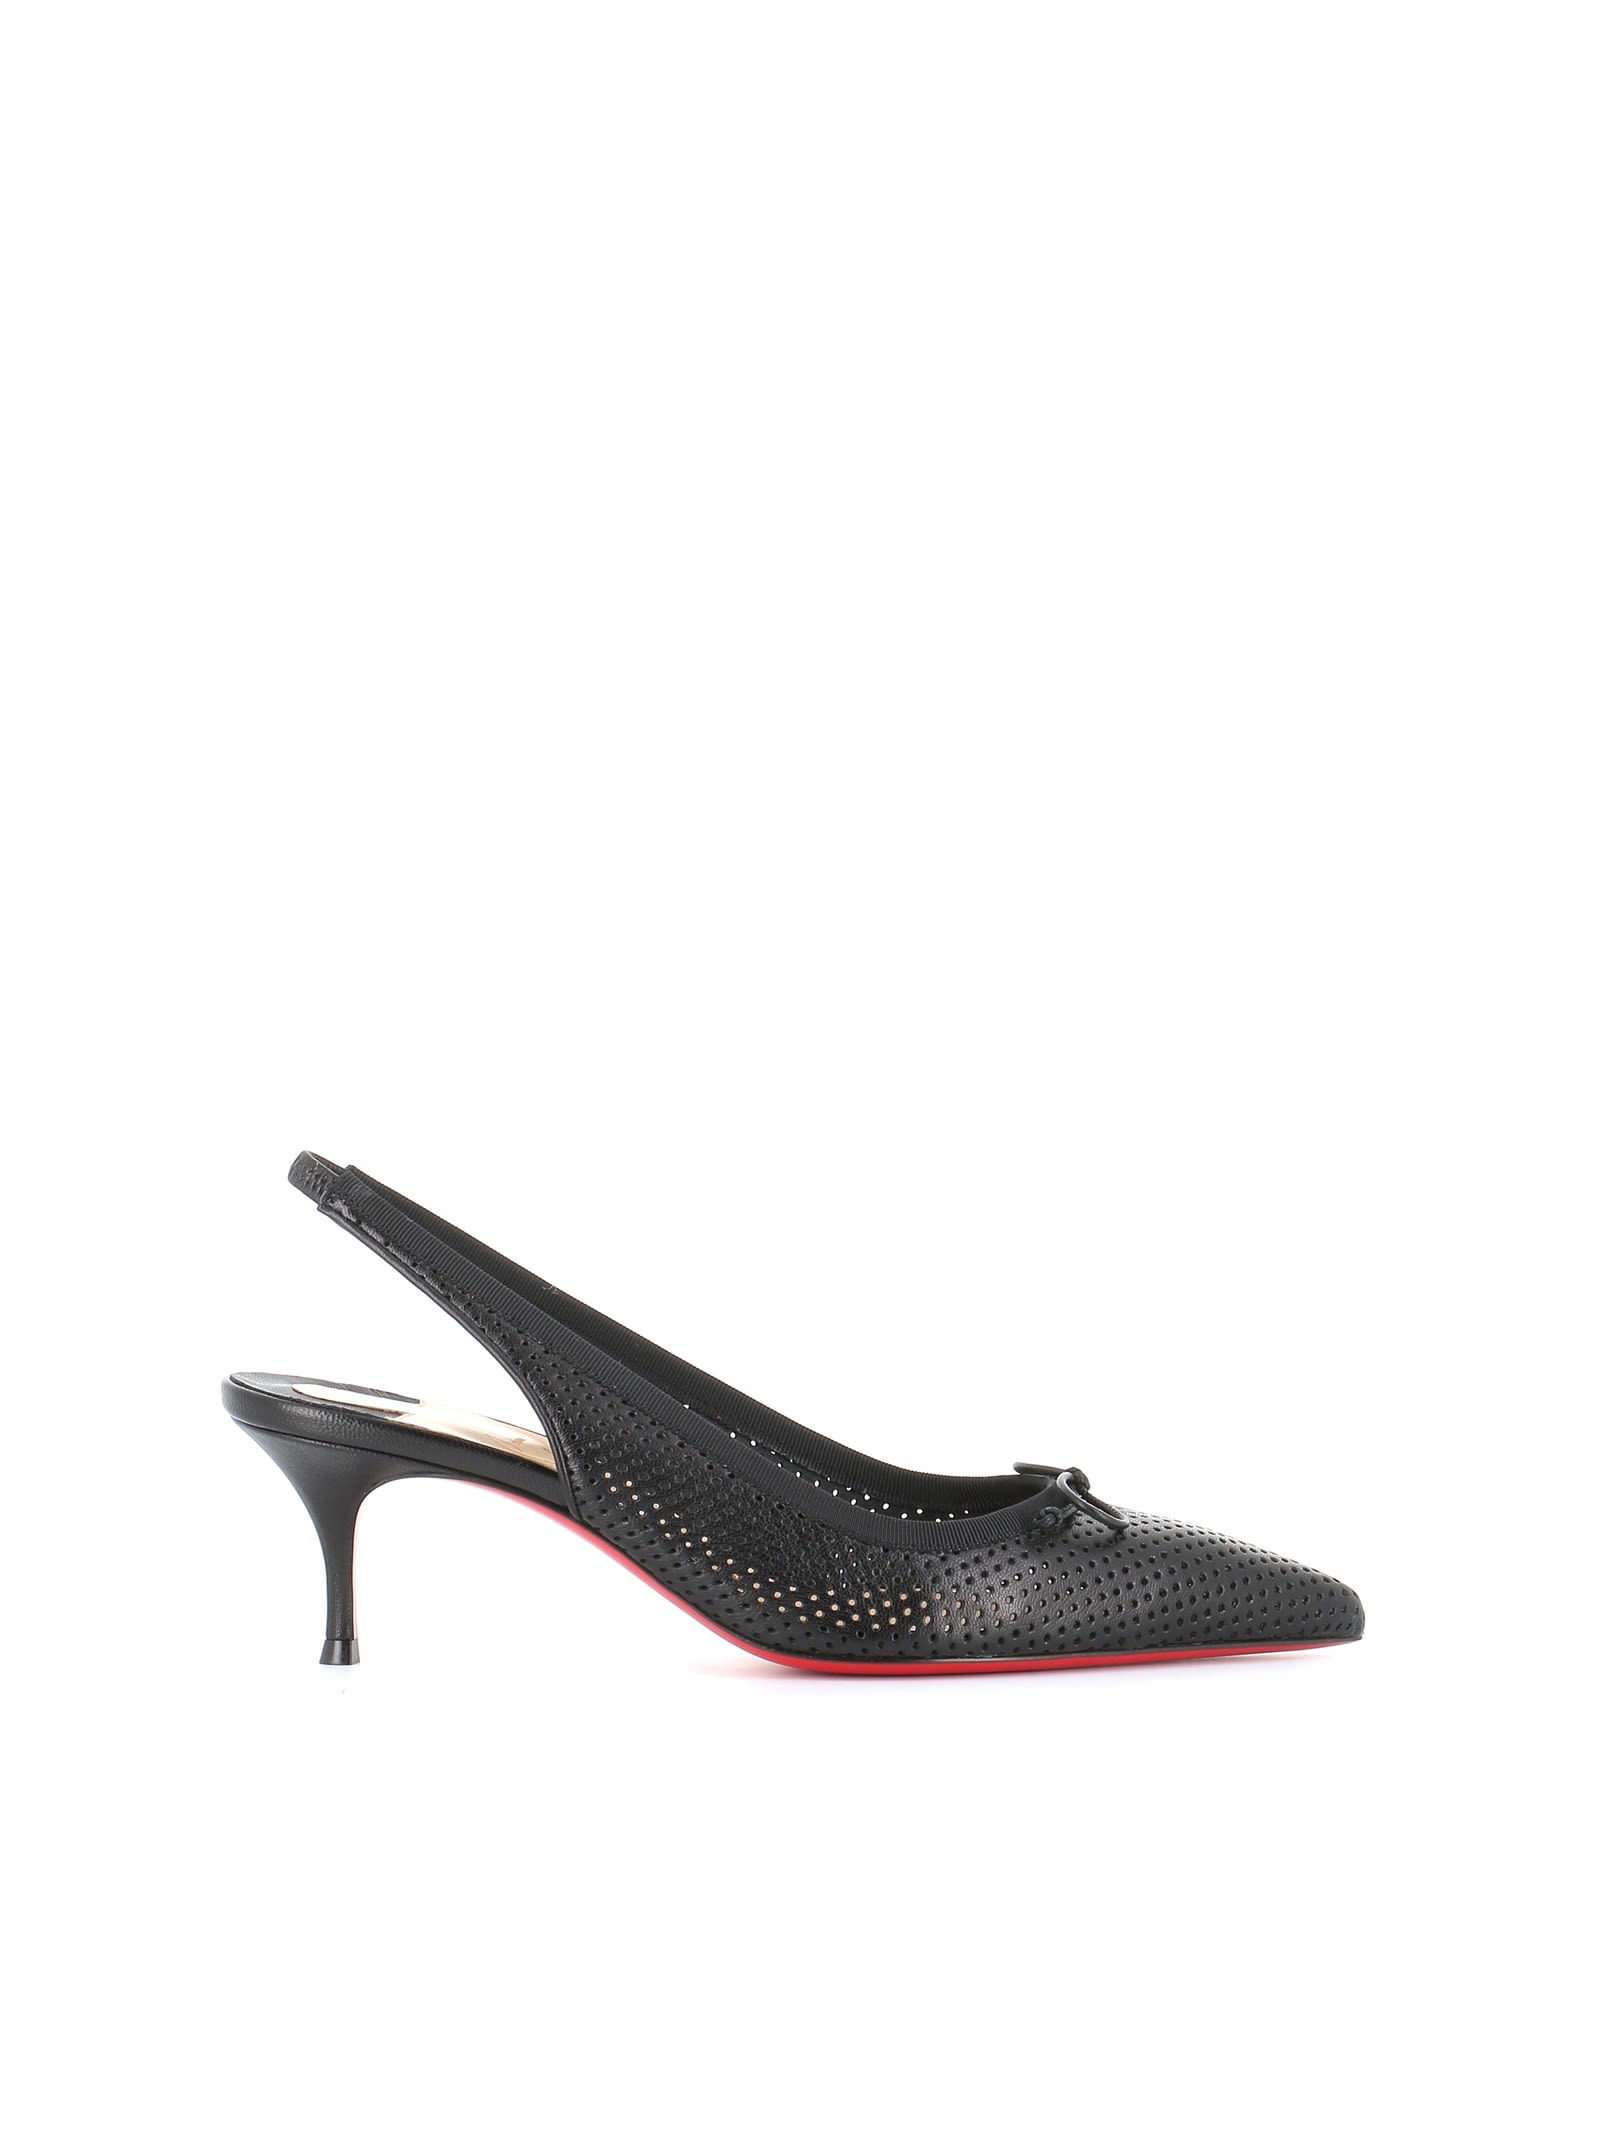 Buy Christian Louboutin D?ollet?hall Sling Pump 55 online, shop Christian Louboutin shoes with free shipping